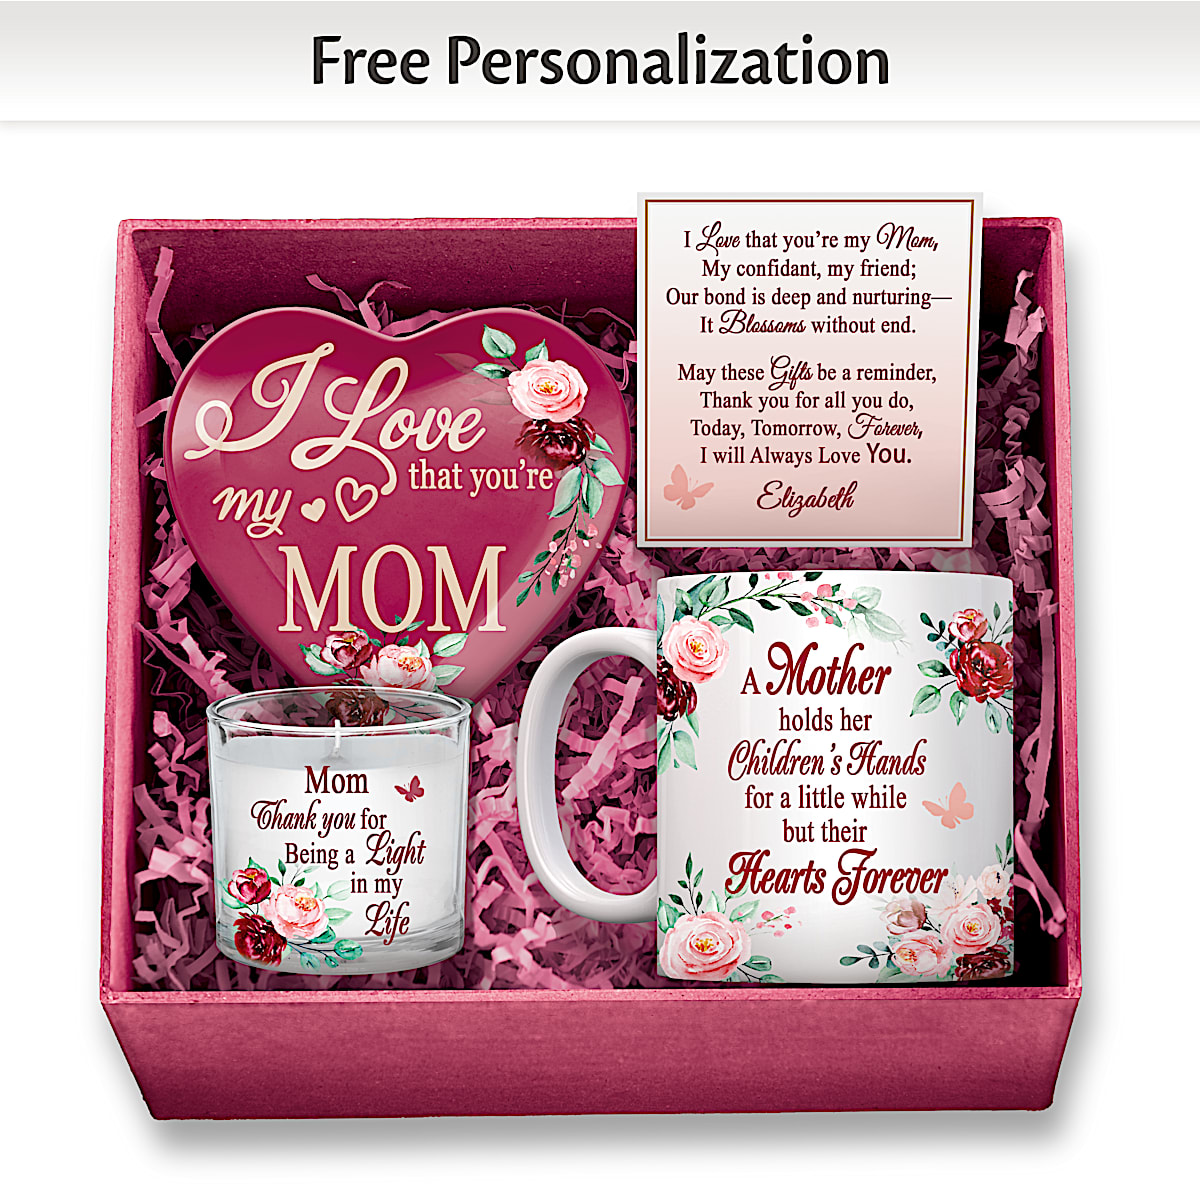 Personalized Gifts for Mom, Kitchen Mom Gift, Mom Recipe Box